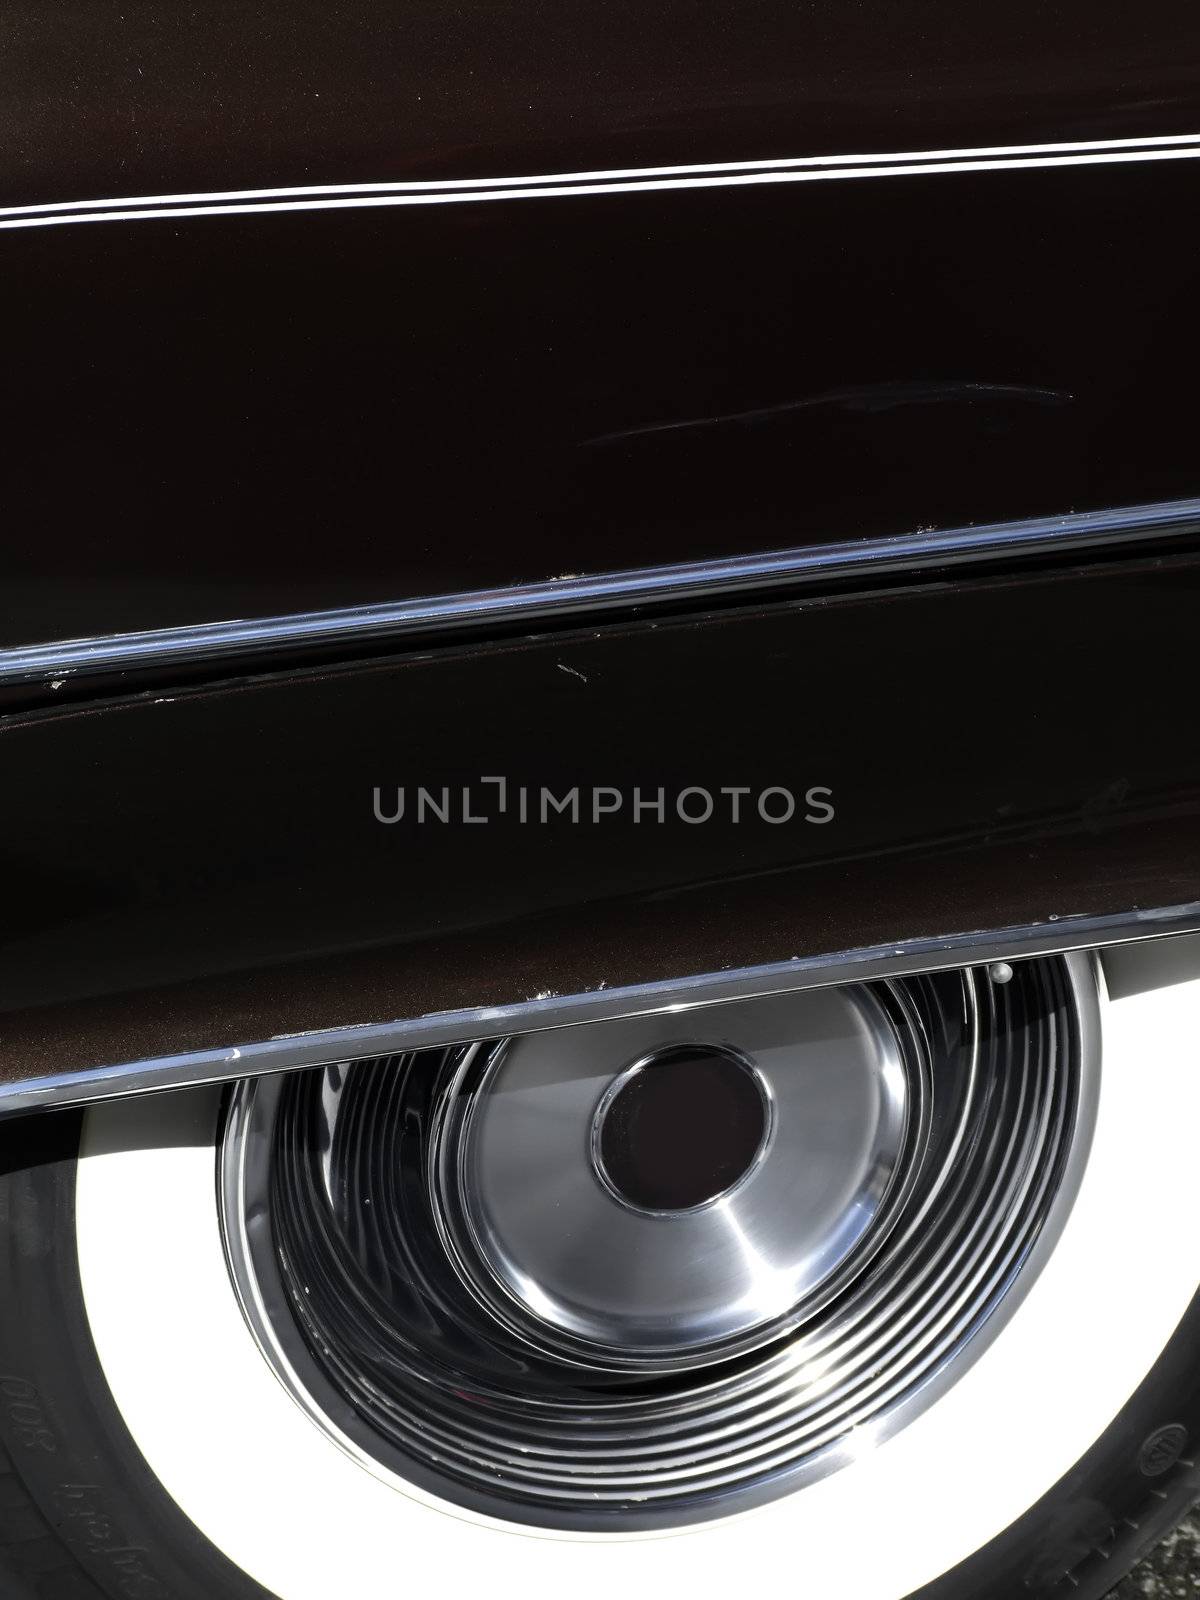 Classic & Vintage Series - various imsges depicting details from classic and vintage automobiles